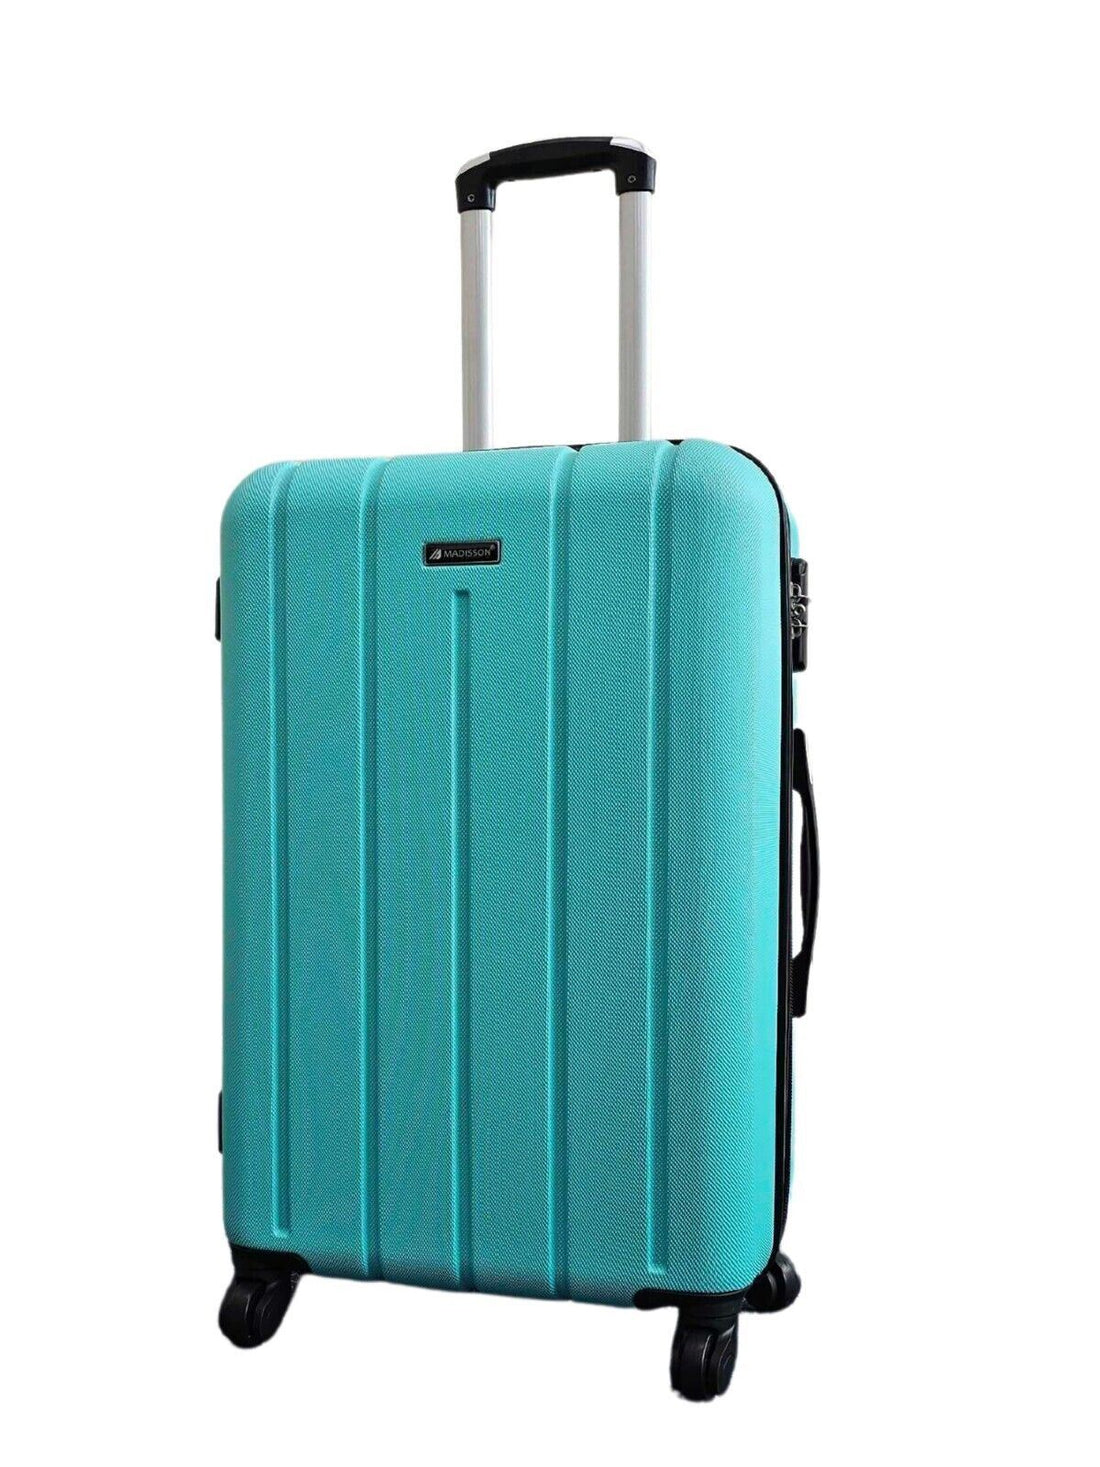 Castleberry Medium Hard Shell Suitcase in Teal